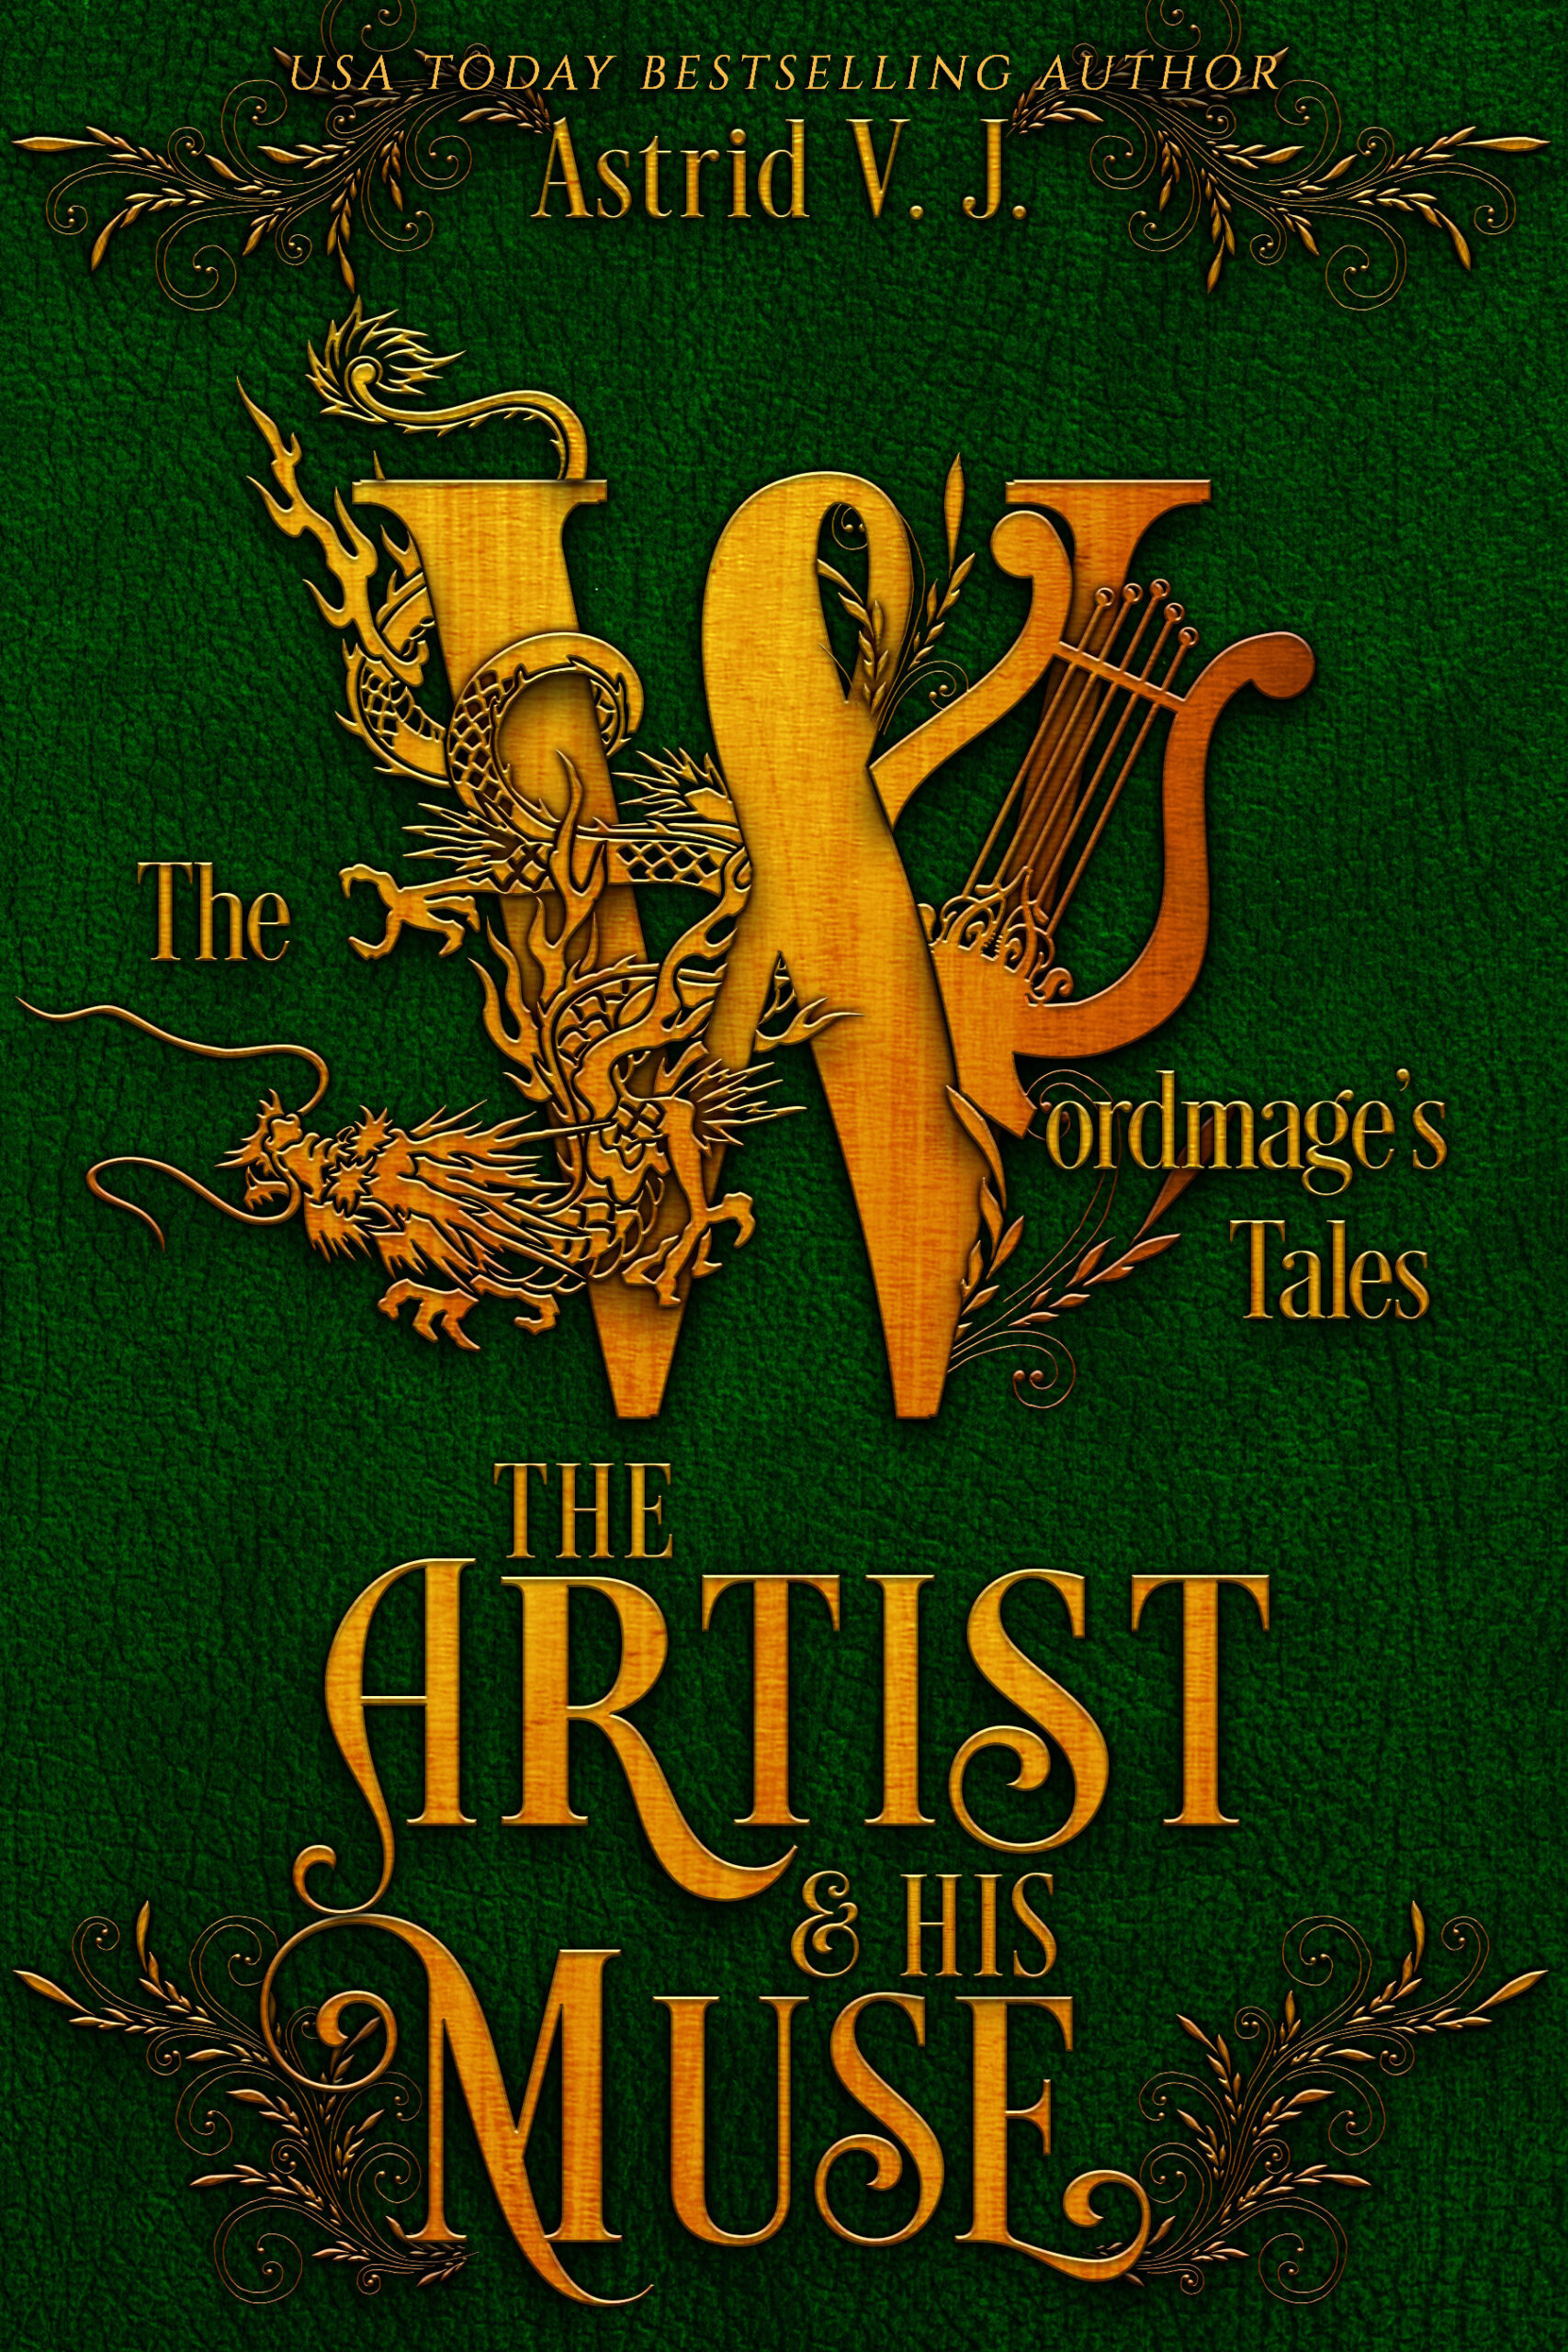 FREE: The Artist and His Muse by Astrid V.J.